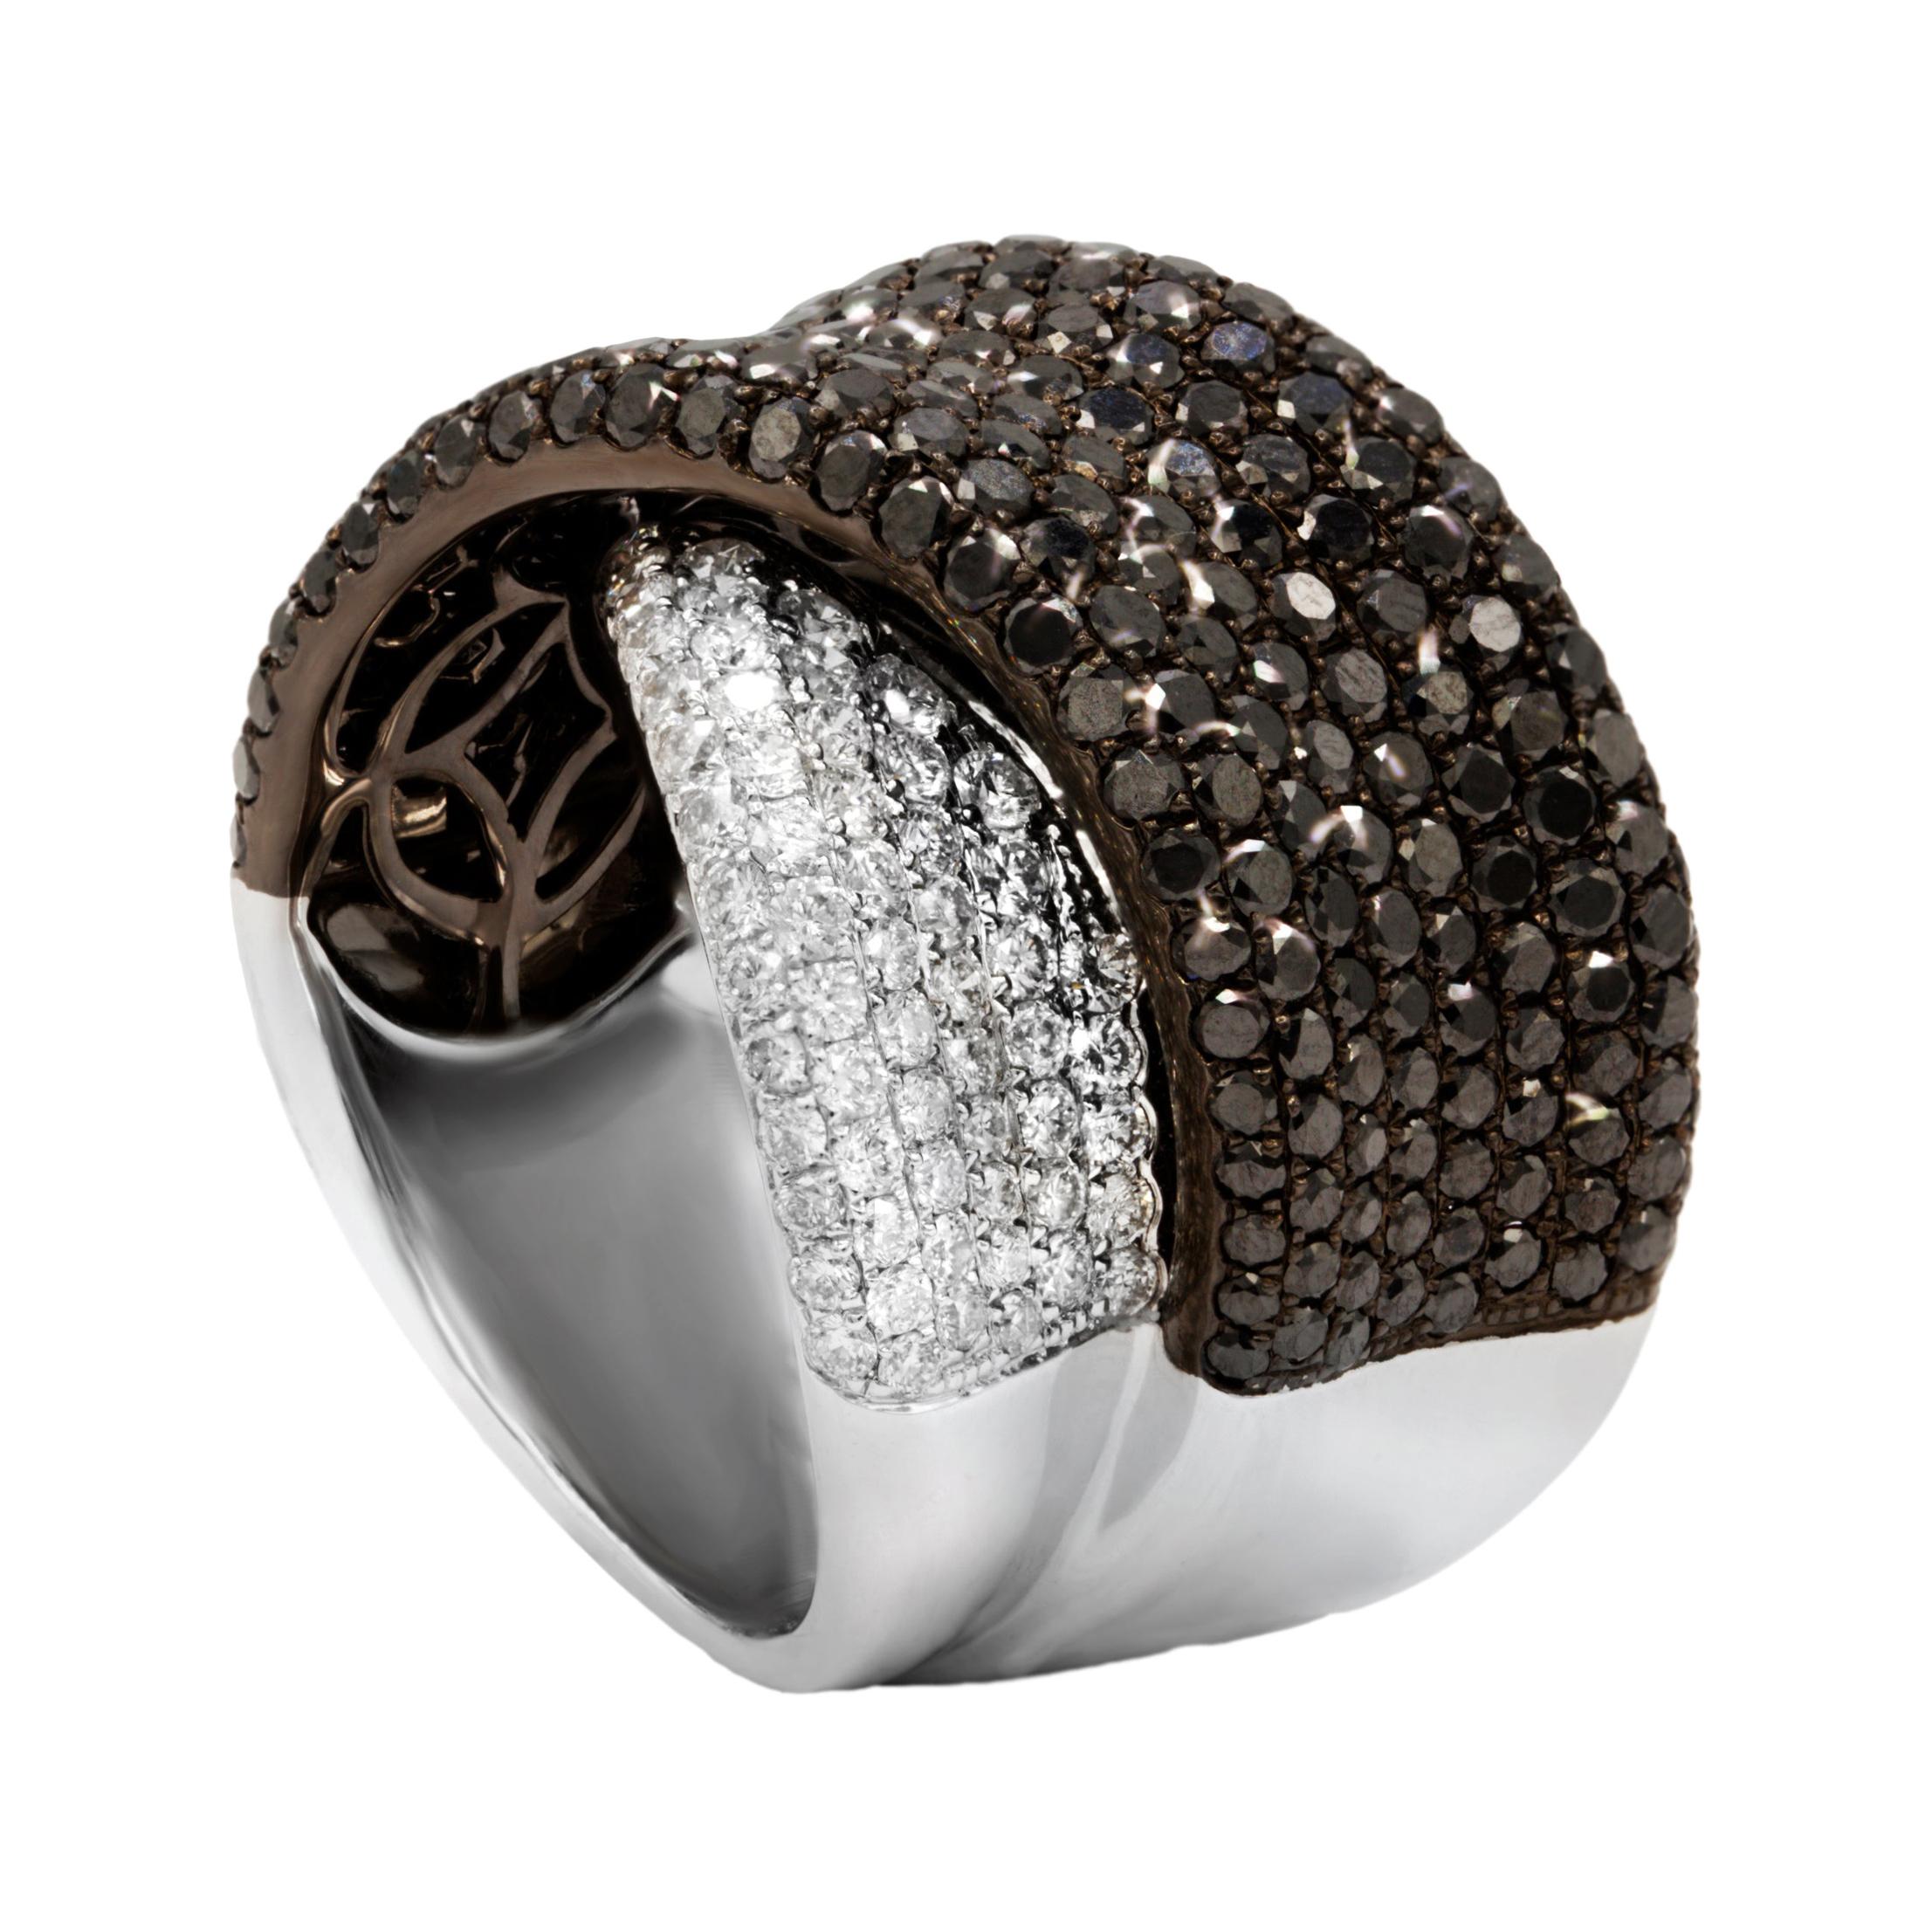 Criss cross black and white diamond ring with micropave round diamonds (b+w) total 4.85ct set in 18kt white gold.
